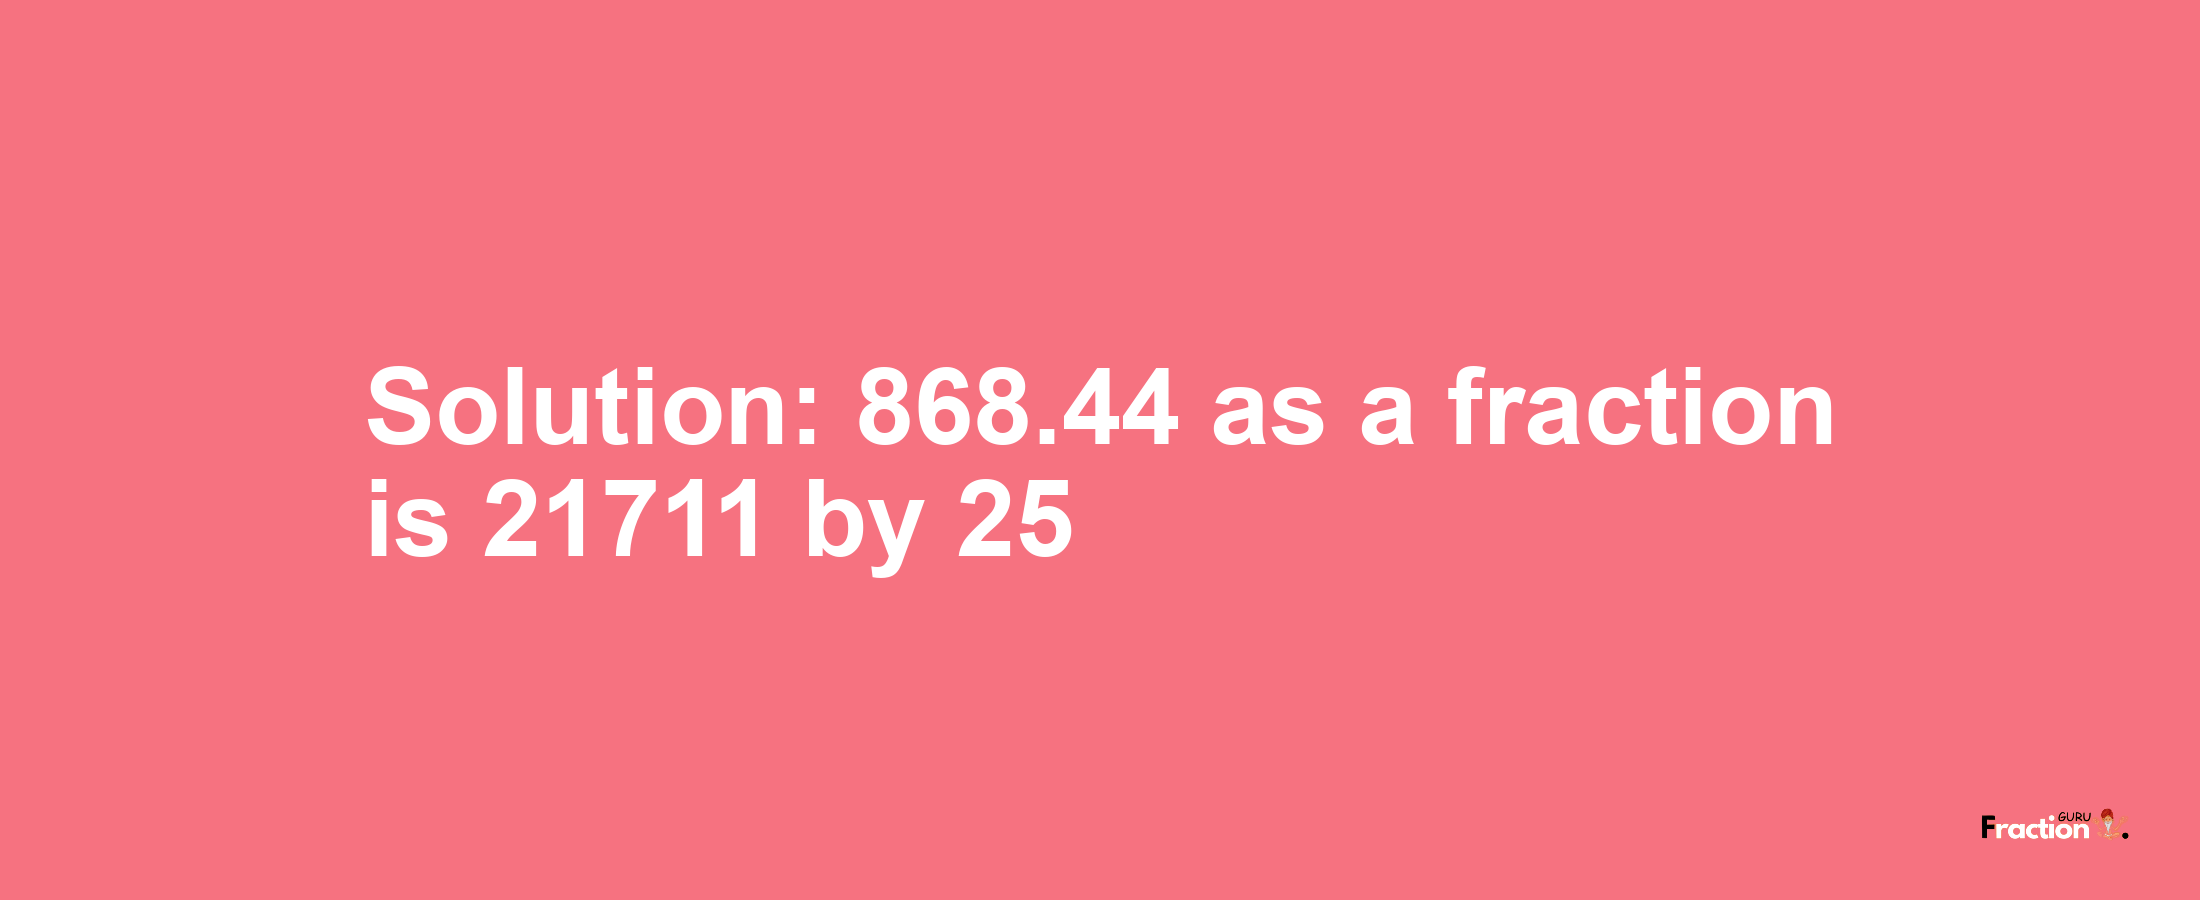 Solution:868.44 as a fraction is 21711/25